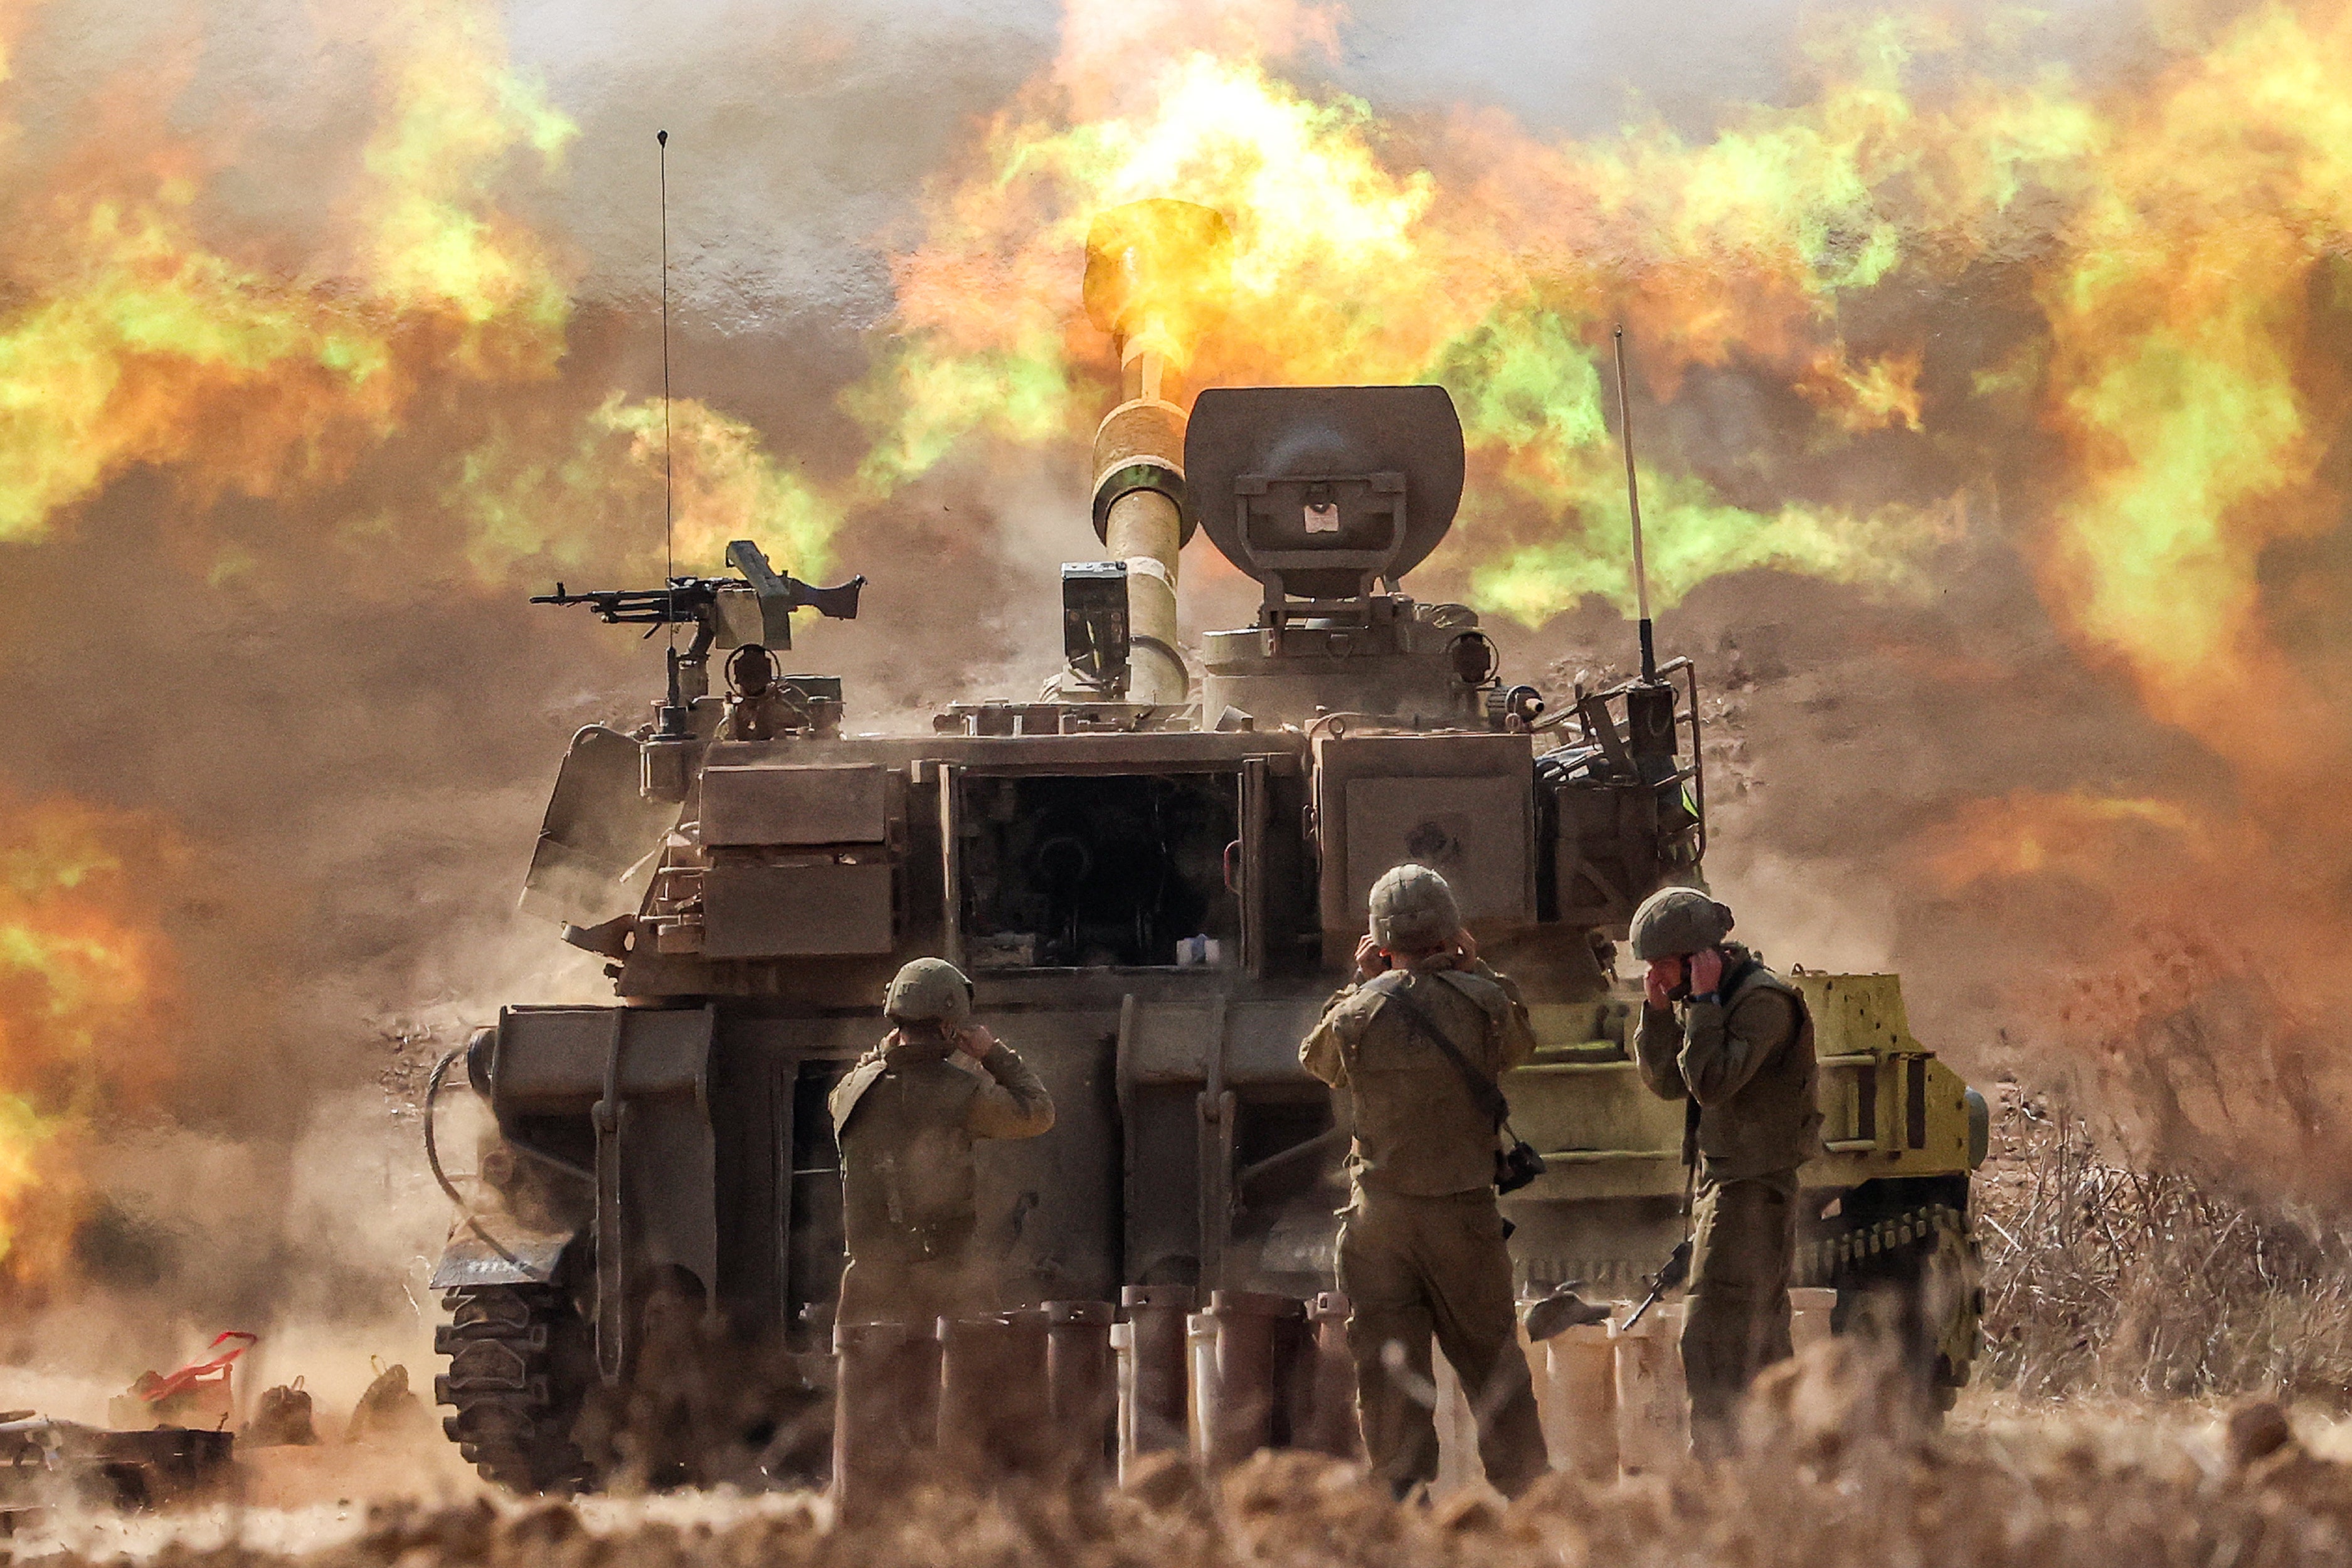 Three soldiers in front of an Israeli tank with inferno in background.